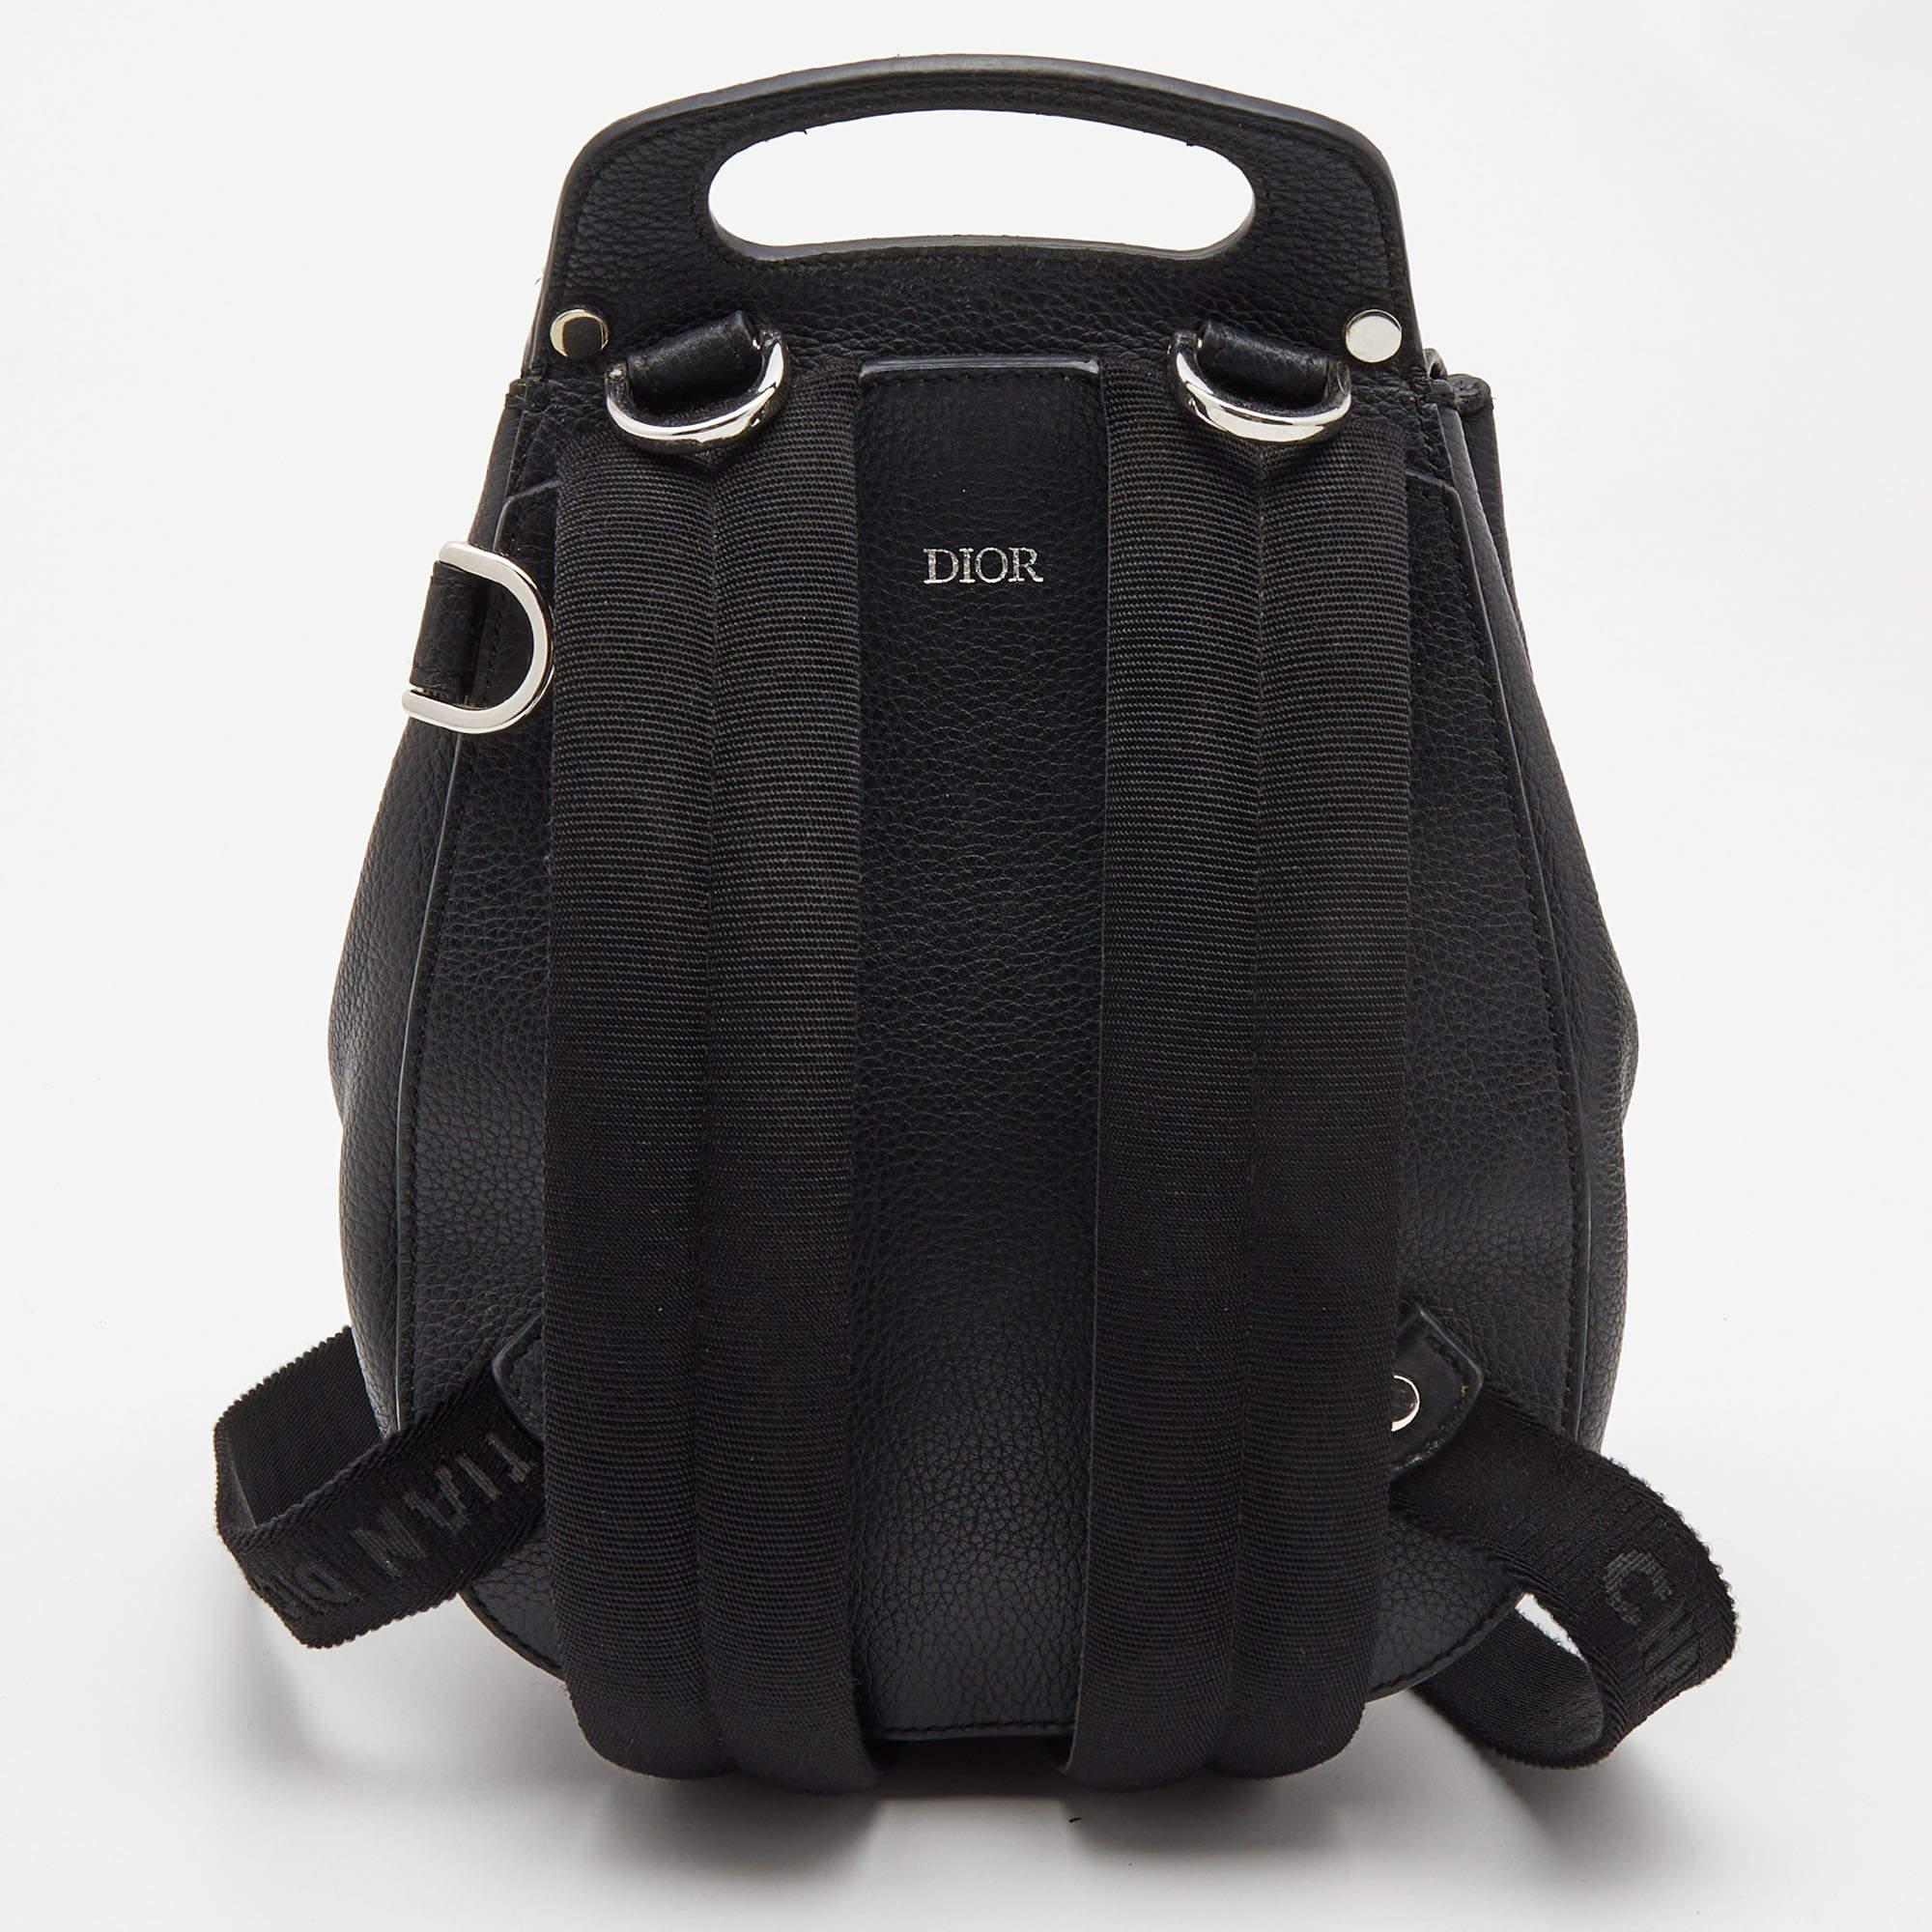 Marked by flawless craftsmanship and enduring appeal, this Dior backpack for women is bound to be a versatile and durable accessory. It has a practical size.

